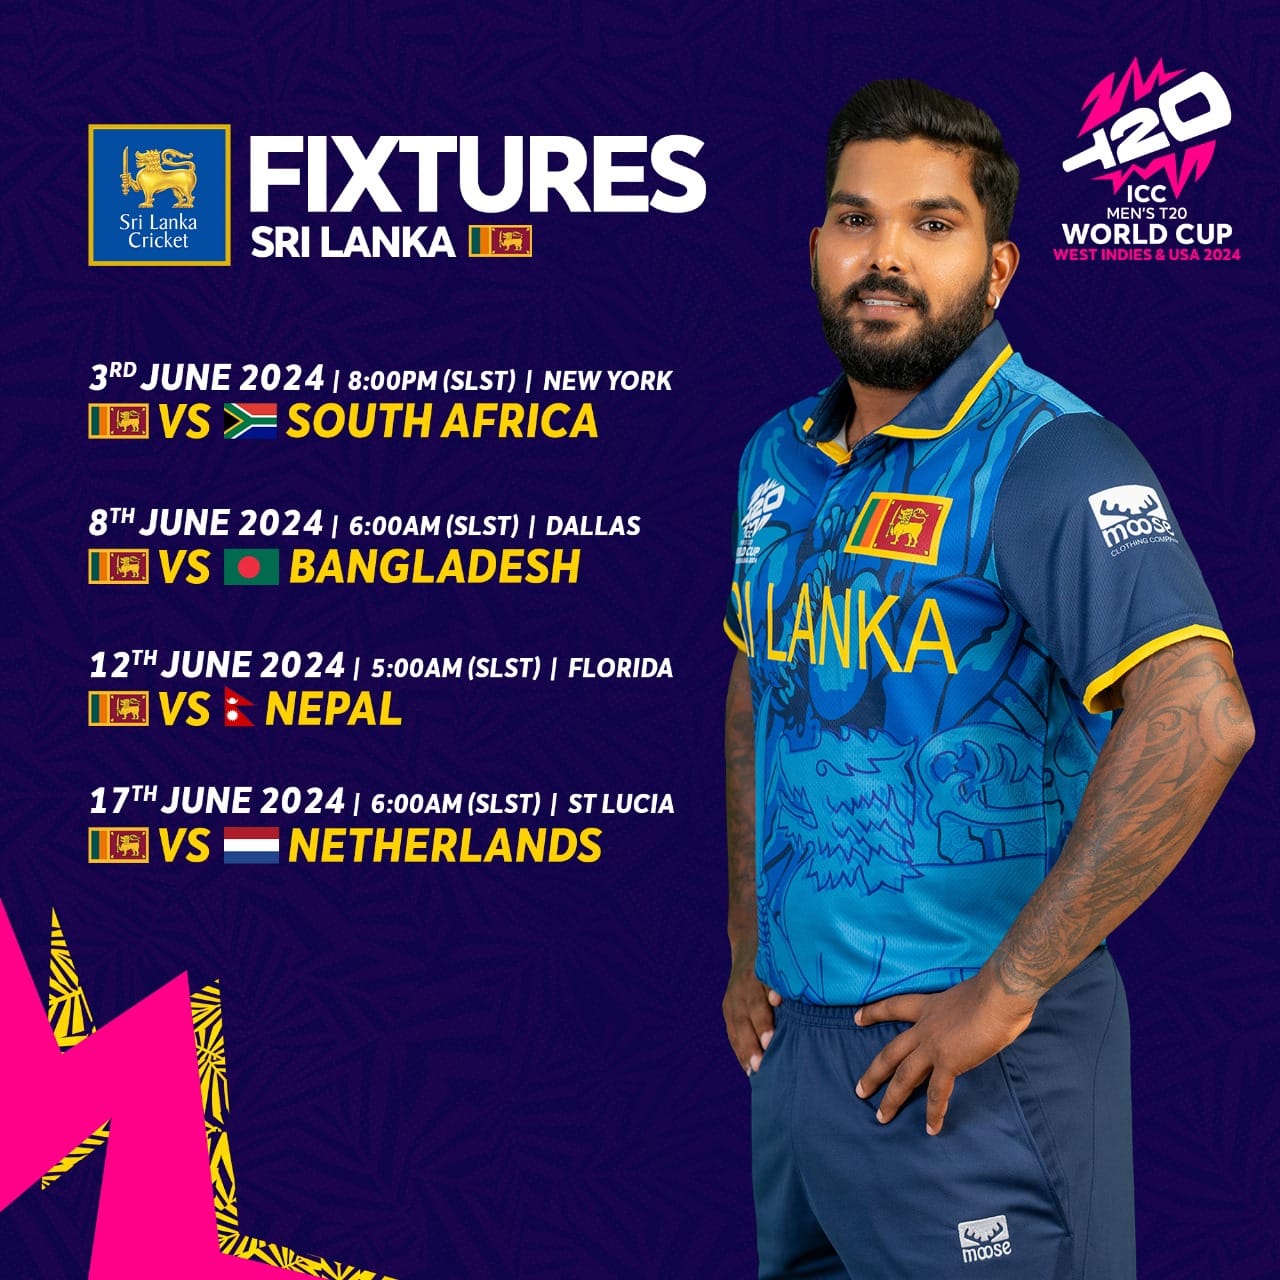 May be an image of 1 person and text that says "120 VICC WORLDCUP BLACK KNIGHT. SRI LANKA FIXTURES AMES 28 MAY LAUDERHILL 8.00 PM VS NETHERLANDS WARMUP VS IRELAND आਾ MAY LAUDERHILL 8.00 PM VS SOUTH AFRICA WOR SRI LA 3RD JUNE NEW YORK 8.00 4 Vs BANGLADESH 8T JUNE DALLAS 6.00 AM ου 12 JUNE LAUDERHILL 5.00 5.00AM AM vs NEPAL Vs *SL TIME NETHERLANDS 17TH JUNE GROS ISLET 6.00 AM SRI LANKA'S NO.1 SPORTS CHANNEL ThePapare"